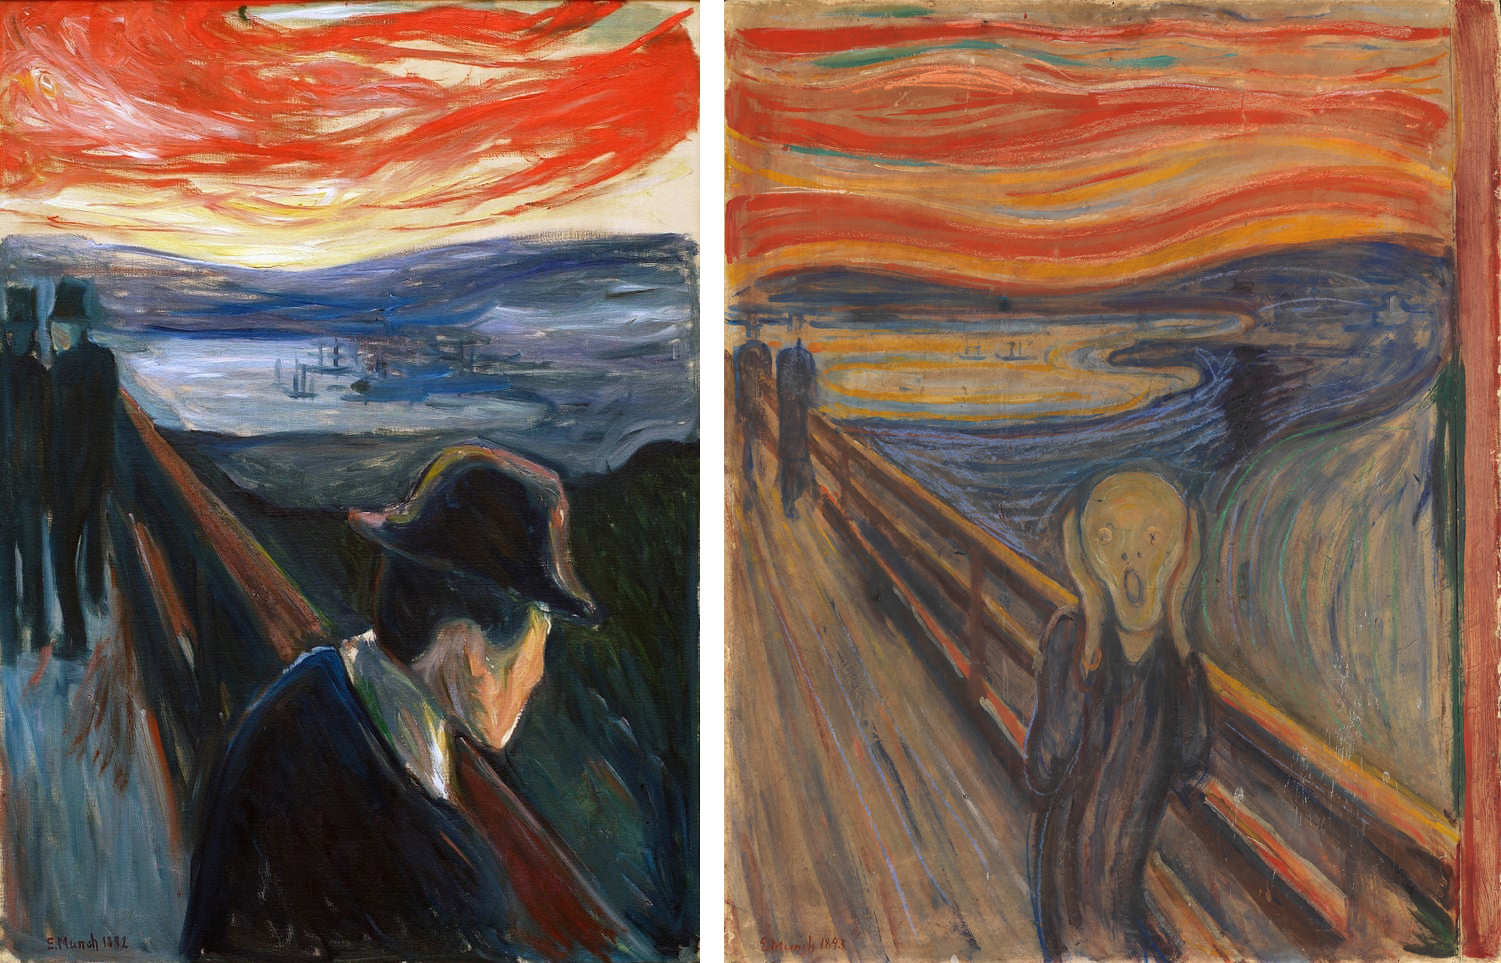 Left: Edvard Munch, Despair (Sick Atmosphere at Sunset), 1892, oil on canvas, 92 x 67 cm (Munch Museum, Oslo); Edvard Munch, The Scream, 1893, pastel and tempera on cardboard, 91 x 73.5 cm (National Art Gallery, Oslo)